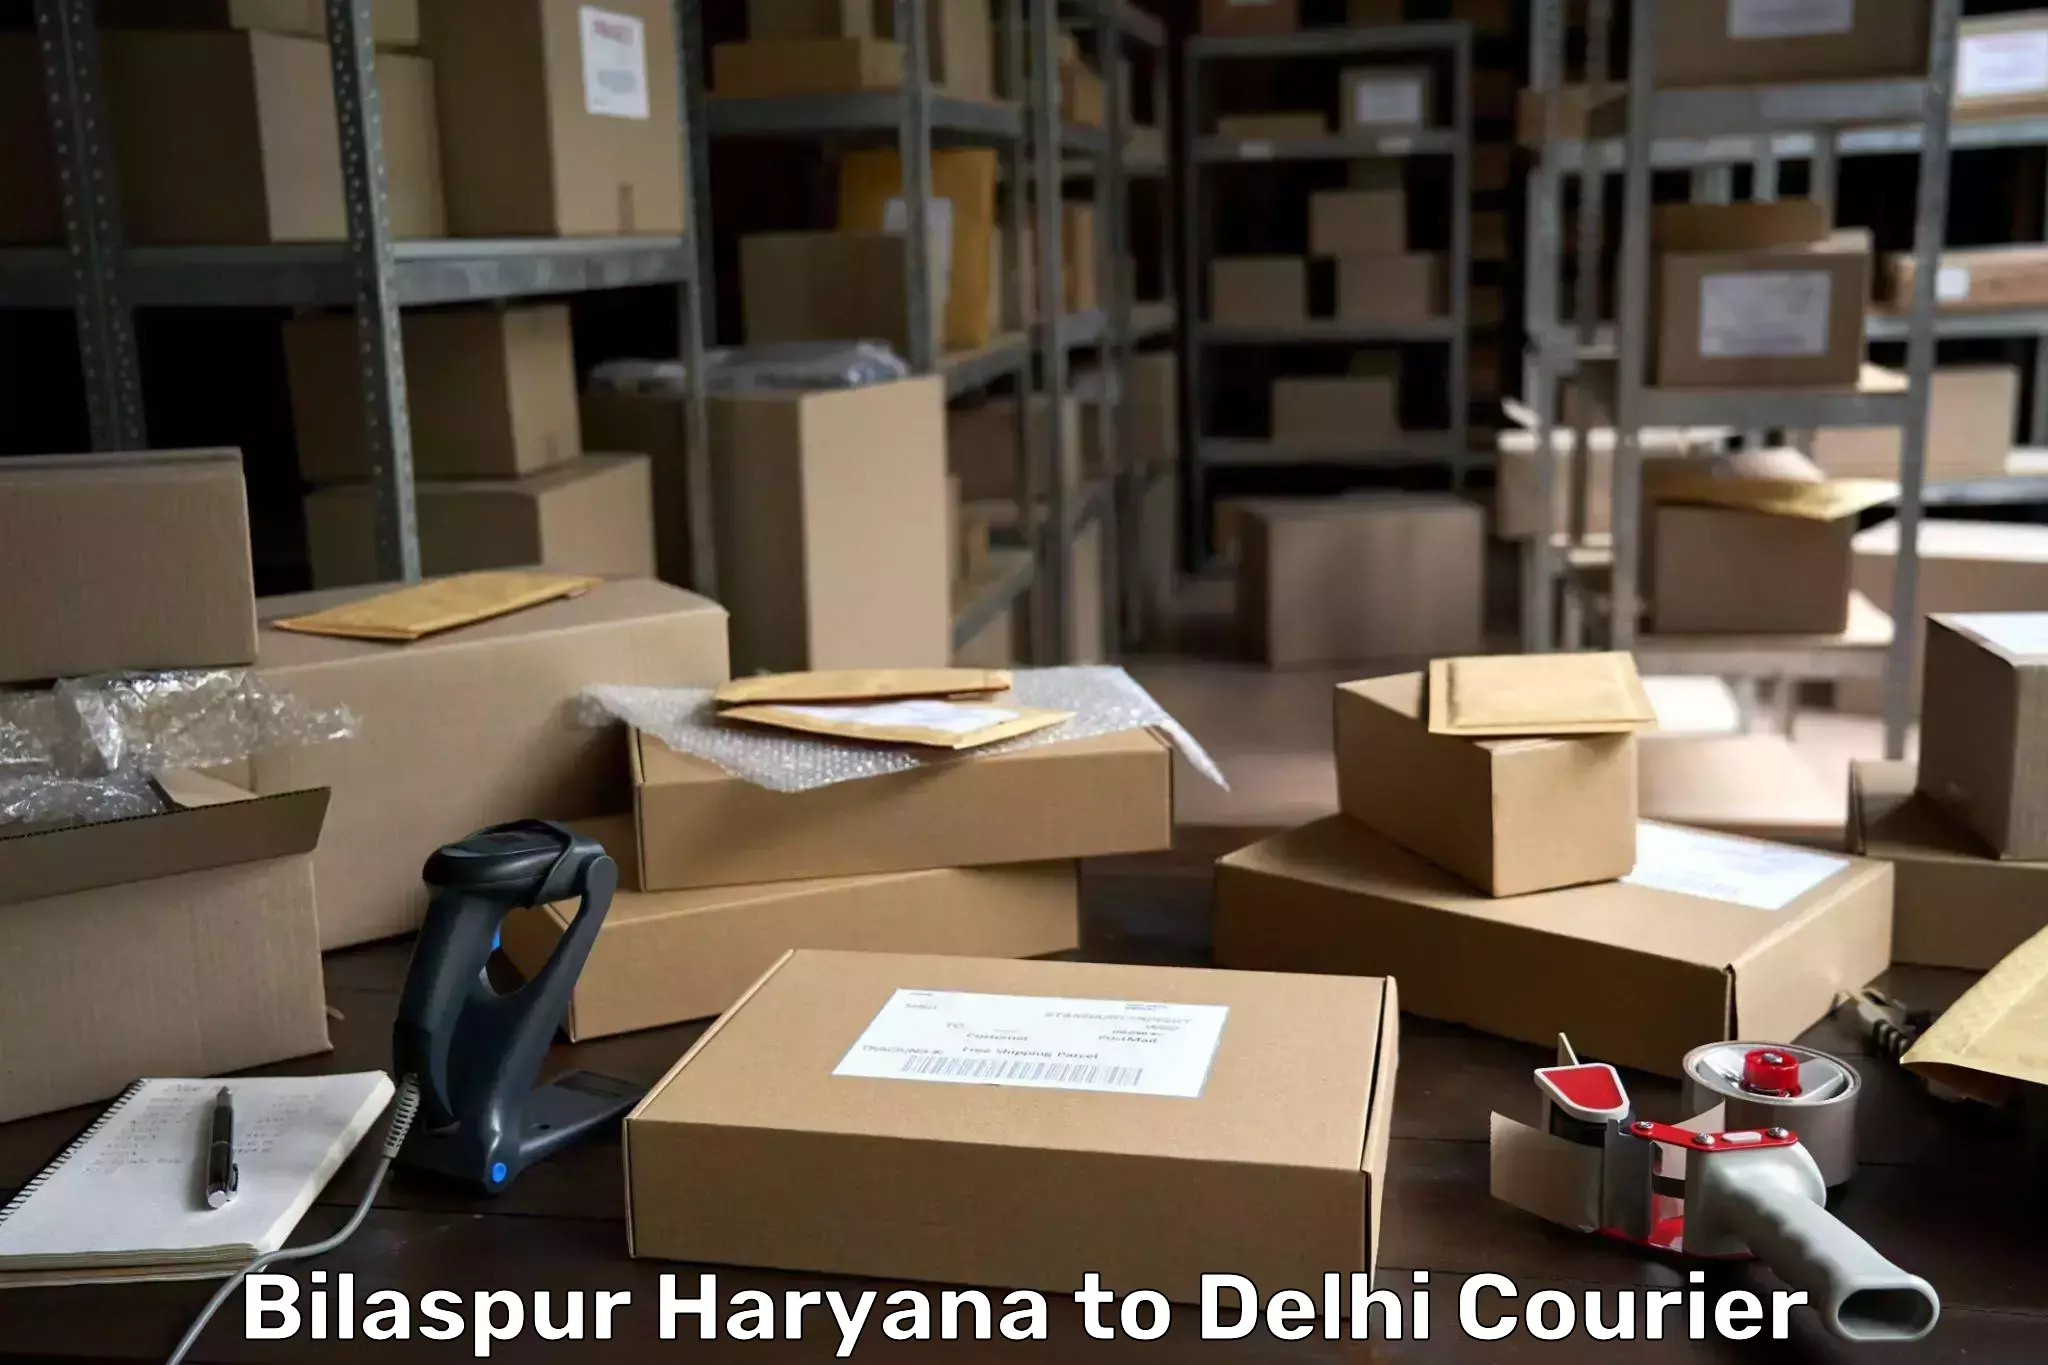 Fast delivery service Bilaspur Haryana to Indraprastha